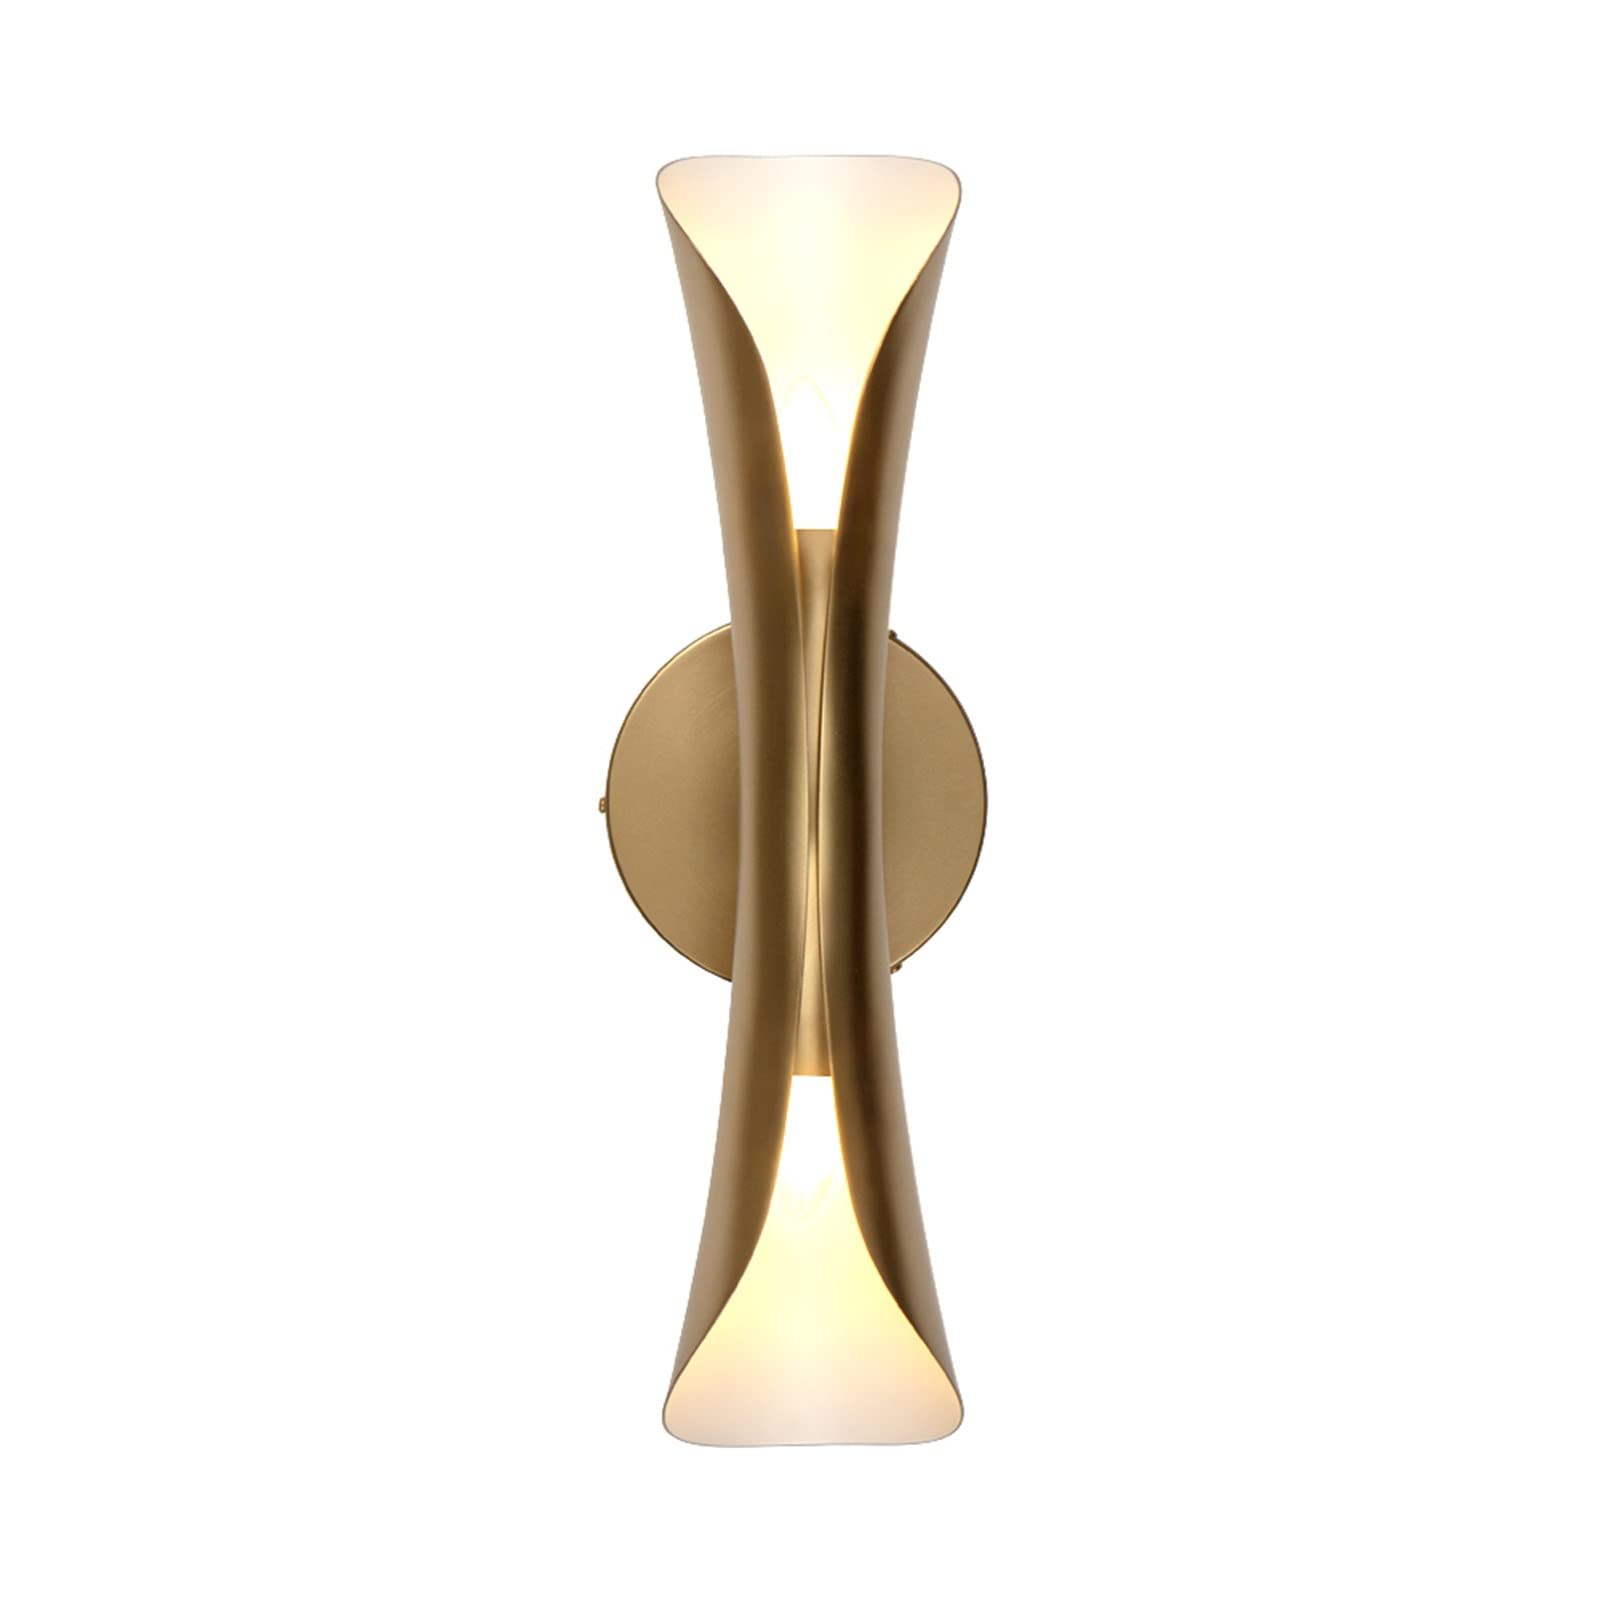 Tubicen Decorative Wall Sconce, 2-Light Dimmable Up Down Wall Light, Indoor Gold Art Deco Wall Lights Fixture for Living Room, Bedroom, Home Theater Sconces Wall Lighting (Bulb Excluded)